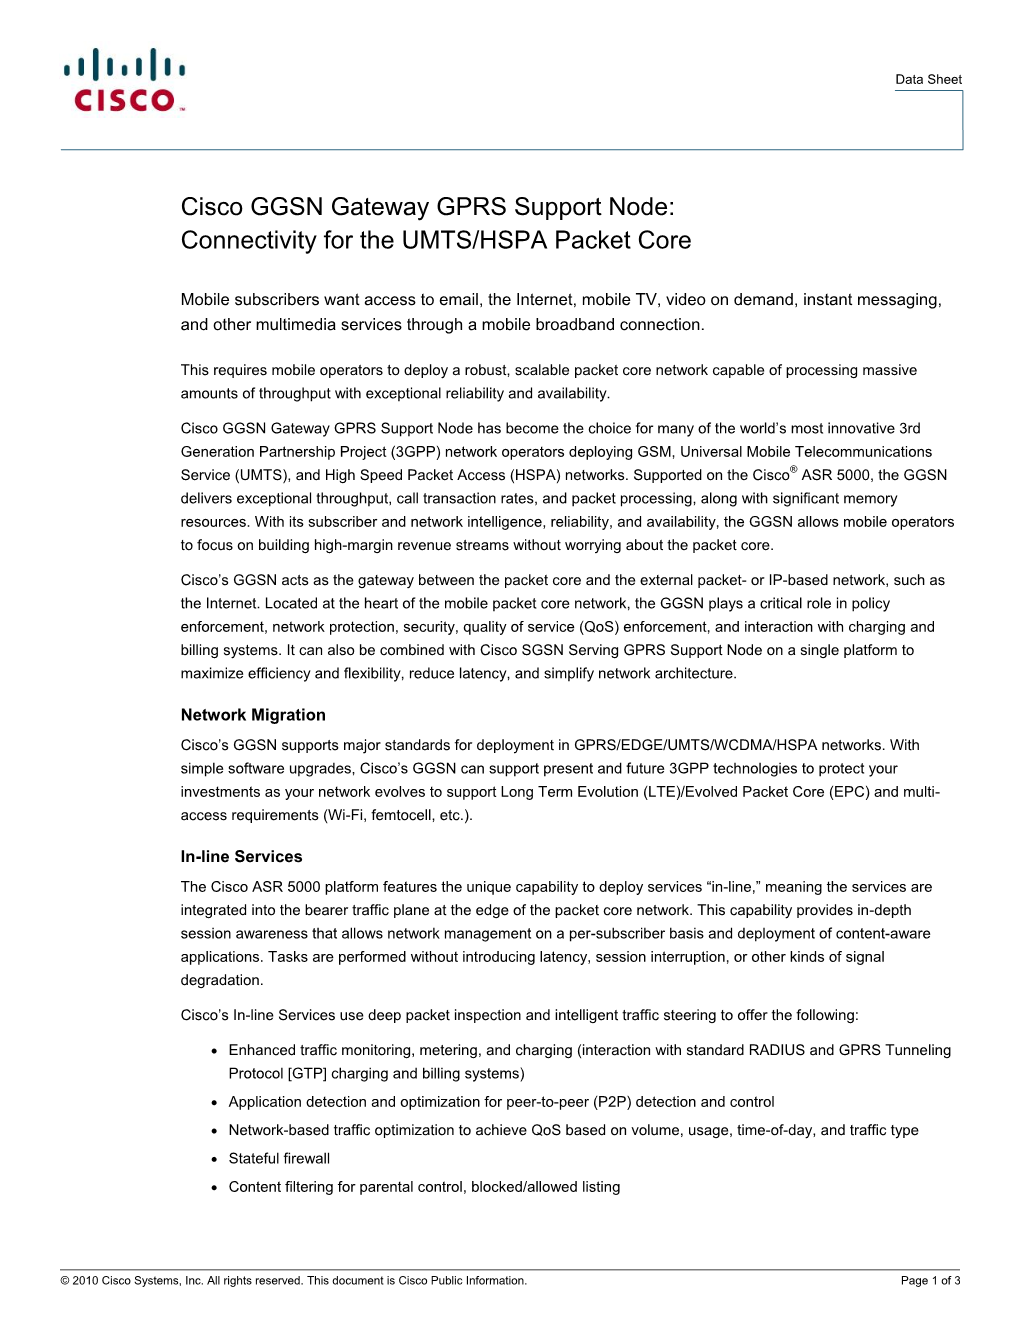 Cisco GGSN Gateway GPRS Support Node: Connectivity for the UMTS/HSPA Packet Core